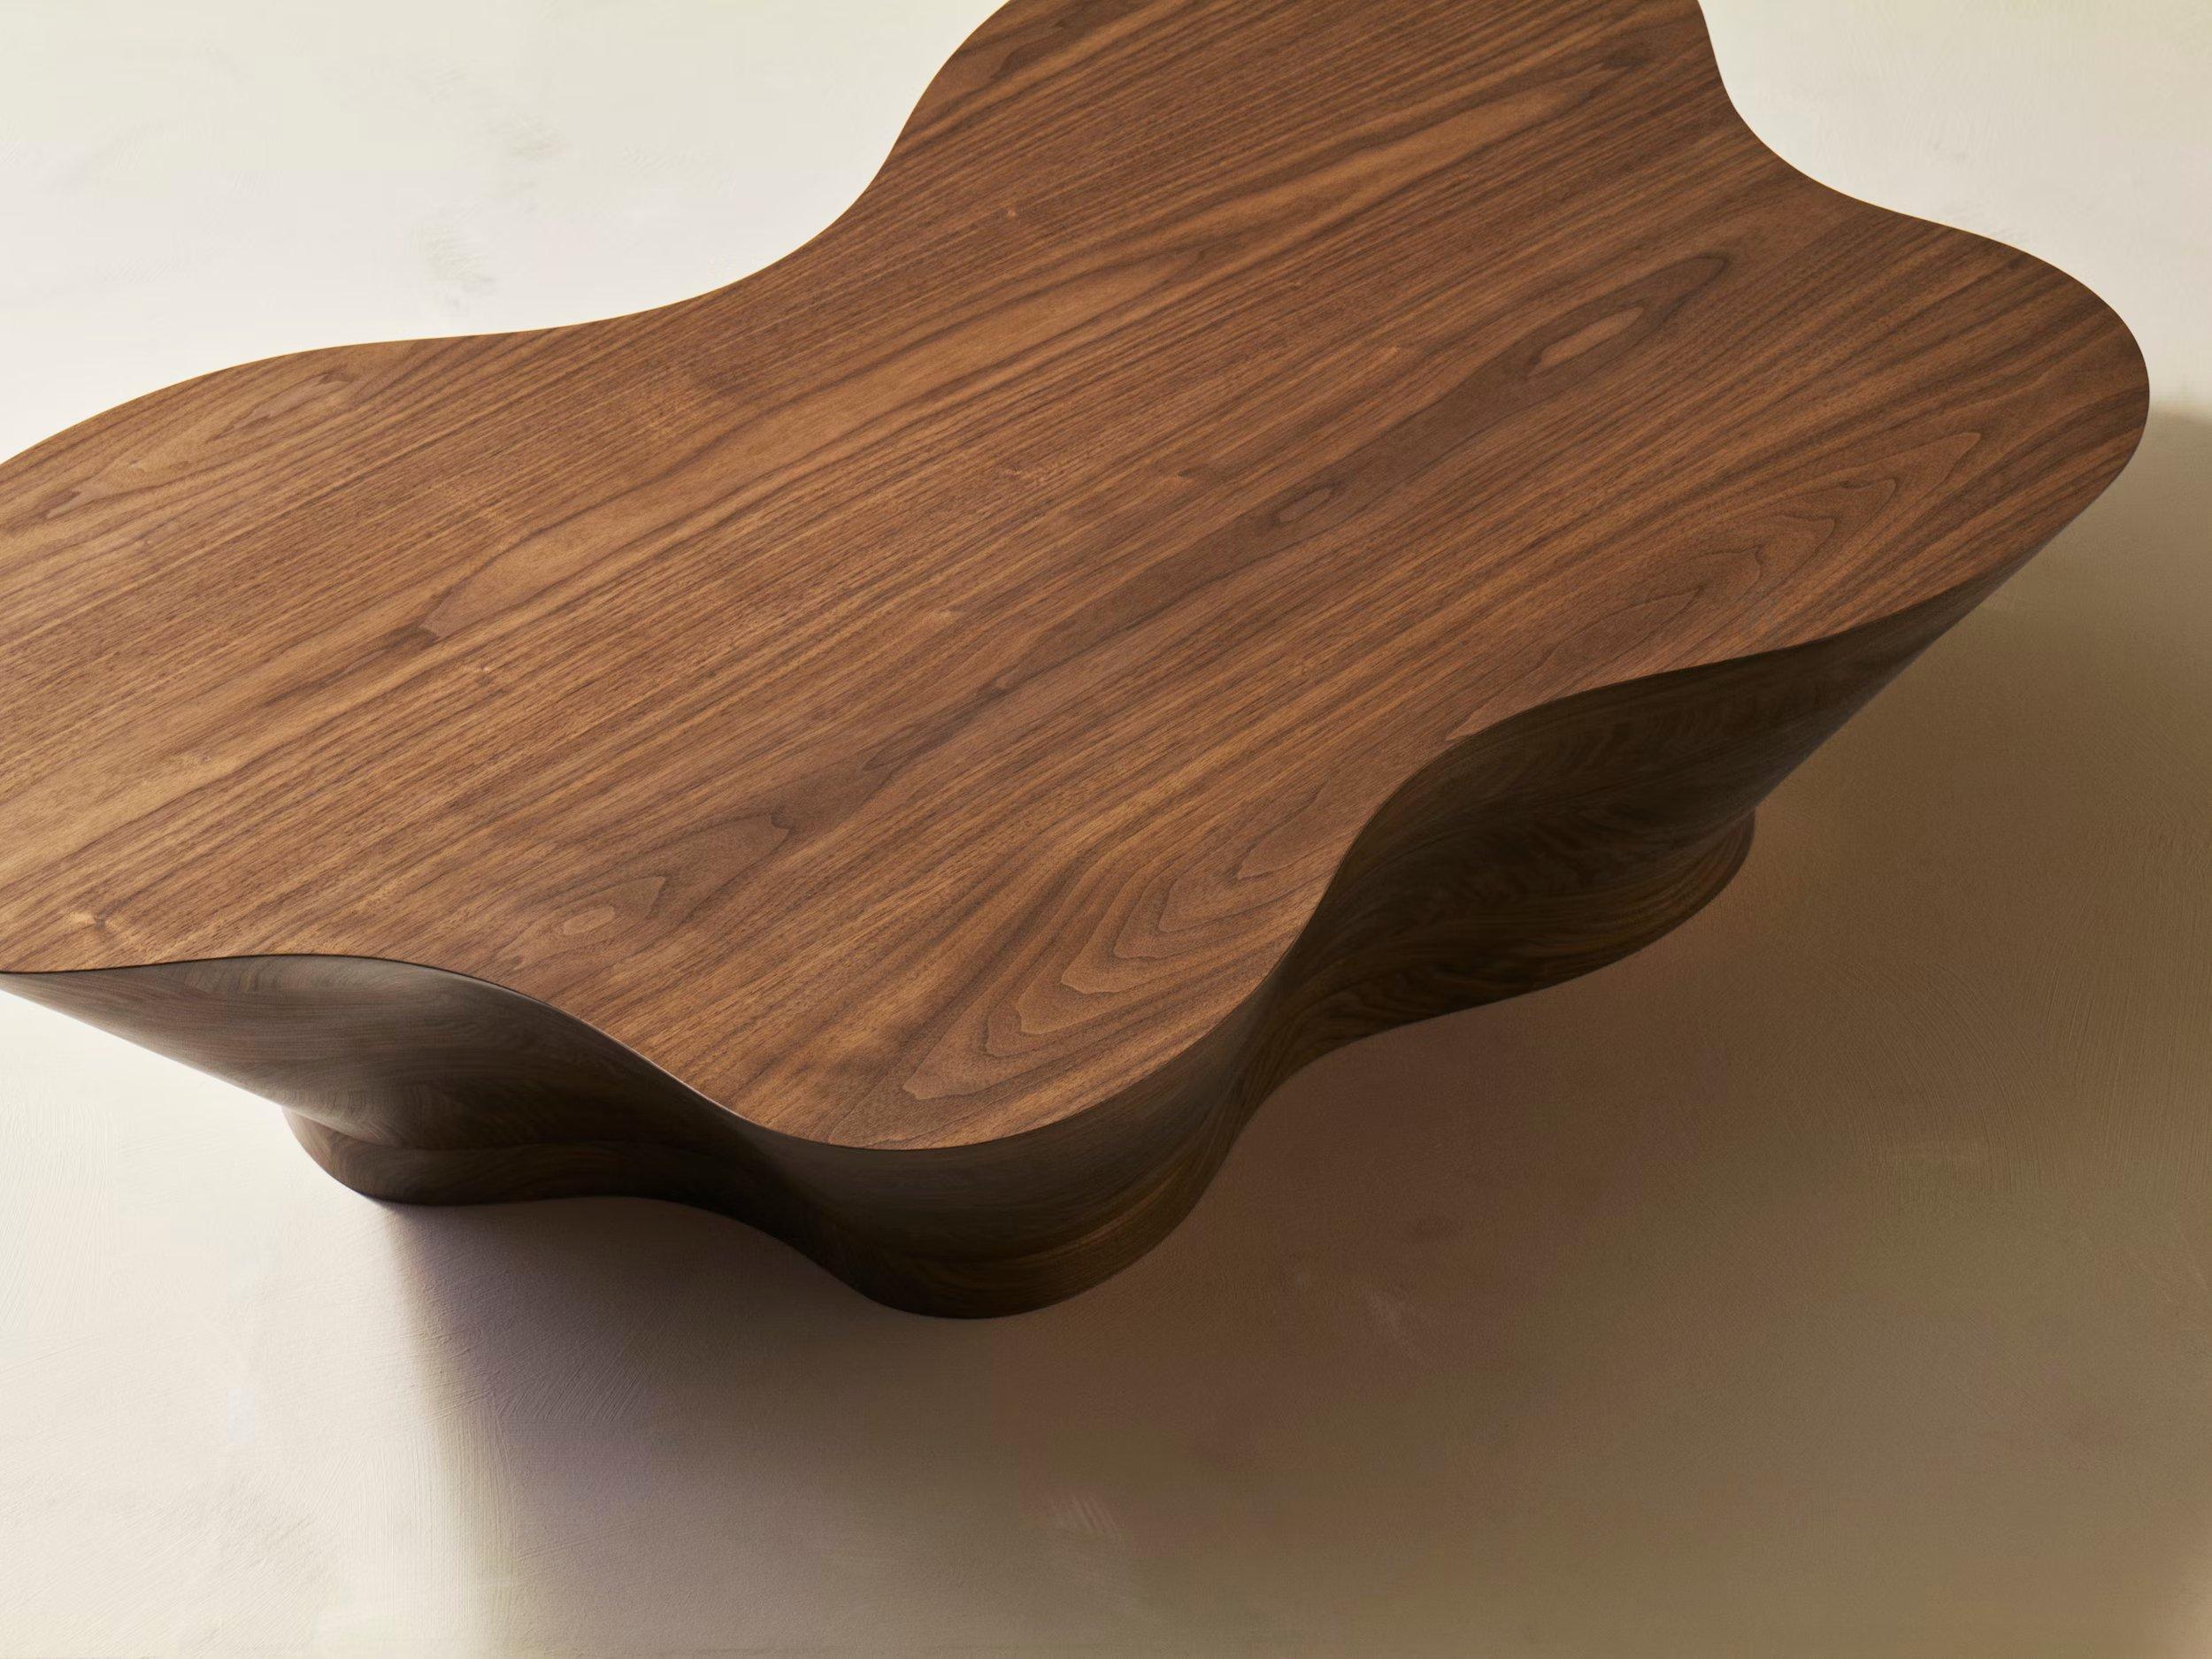 A coffee table with a supremely organic shape, the SSU (Sunny Side Up) is handmade from premium timber. The result is a beautiful exemplar of modest luxury, with the robustness of the wood complementing the table’s elegant lines, gradually thinning